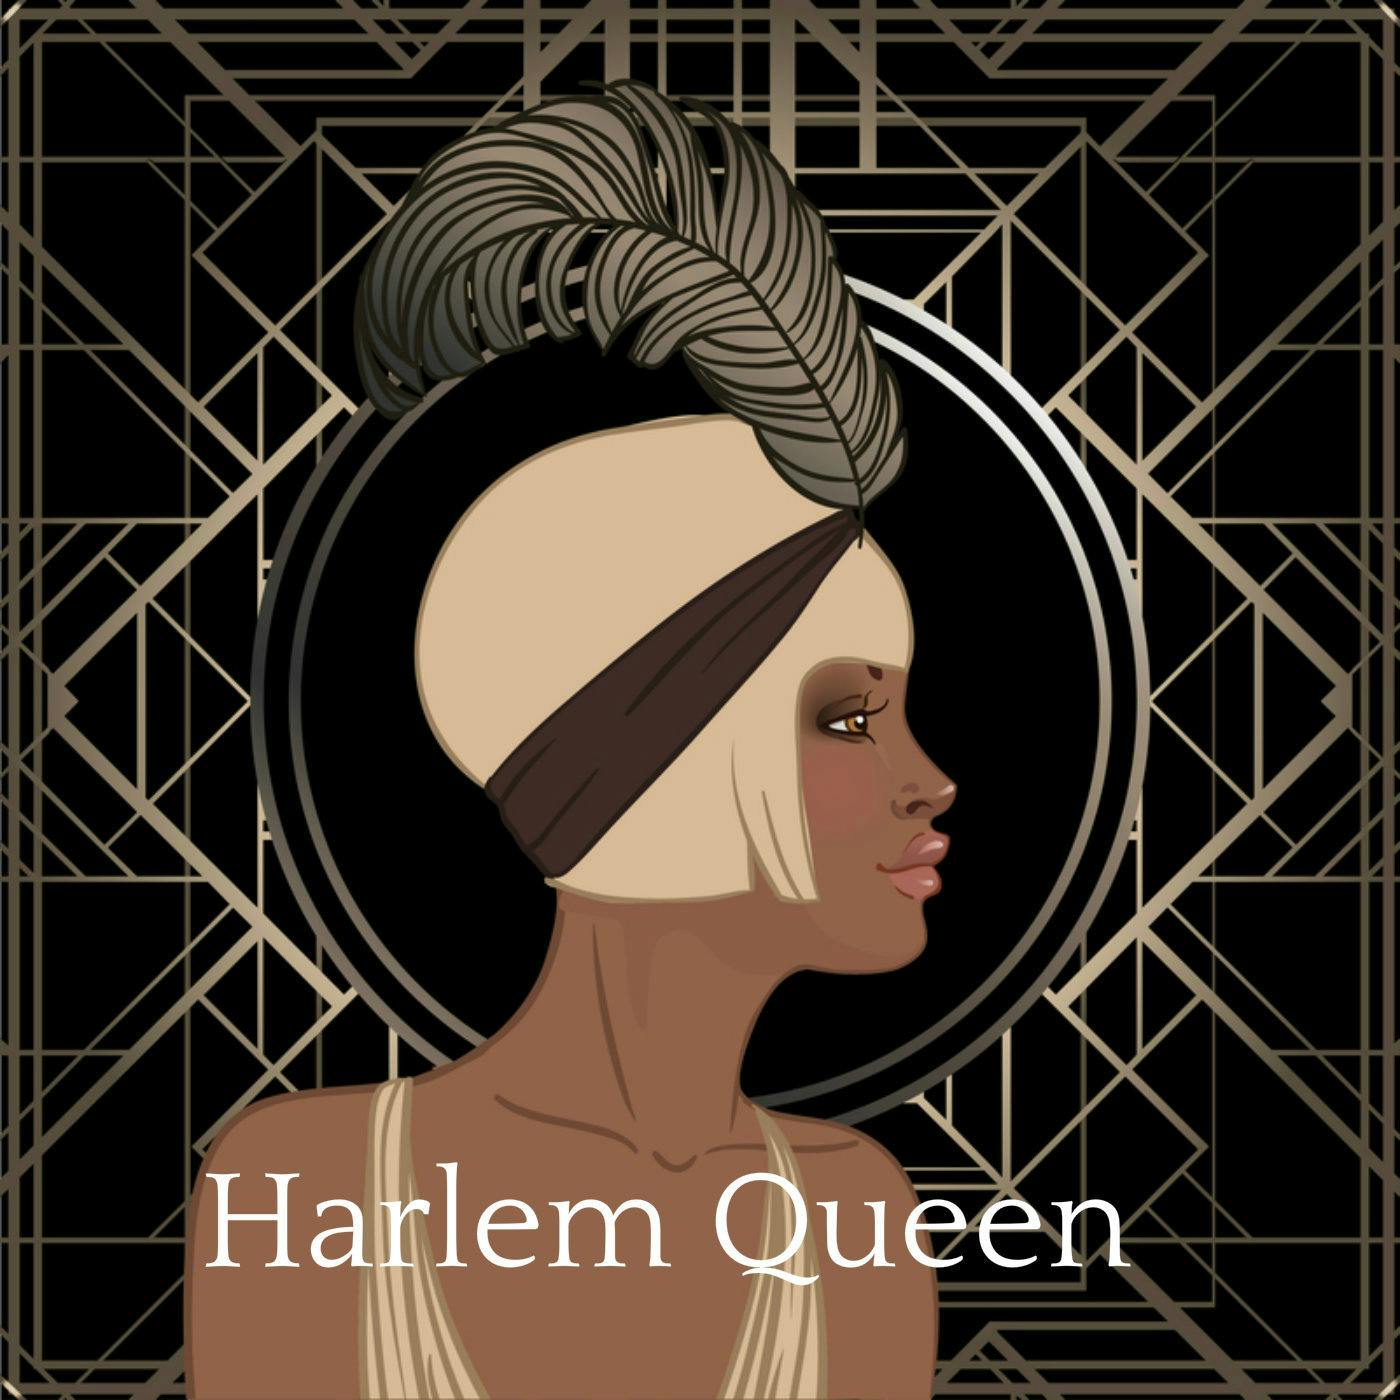 "Harlem Queen" Podcast